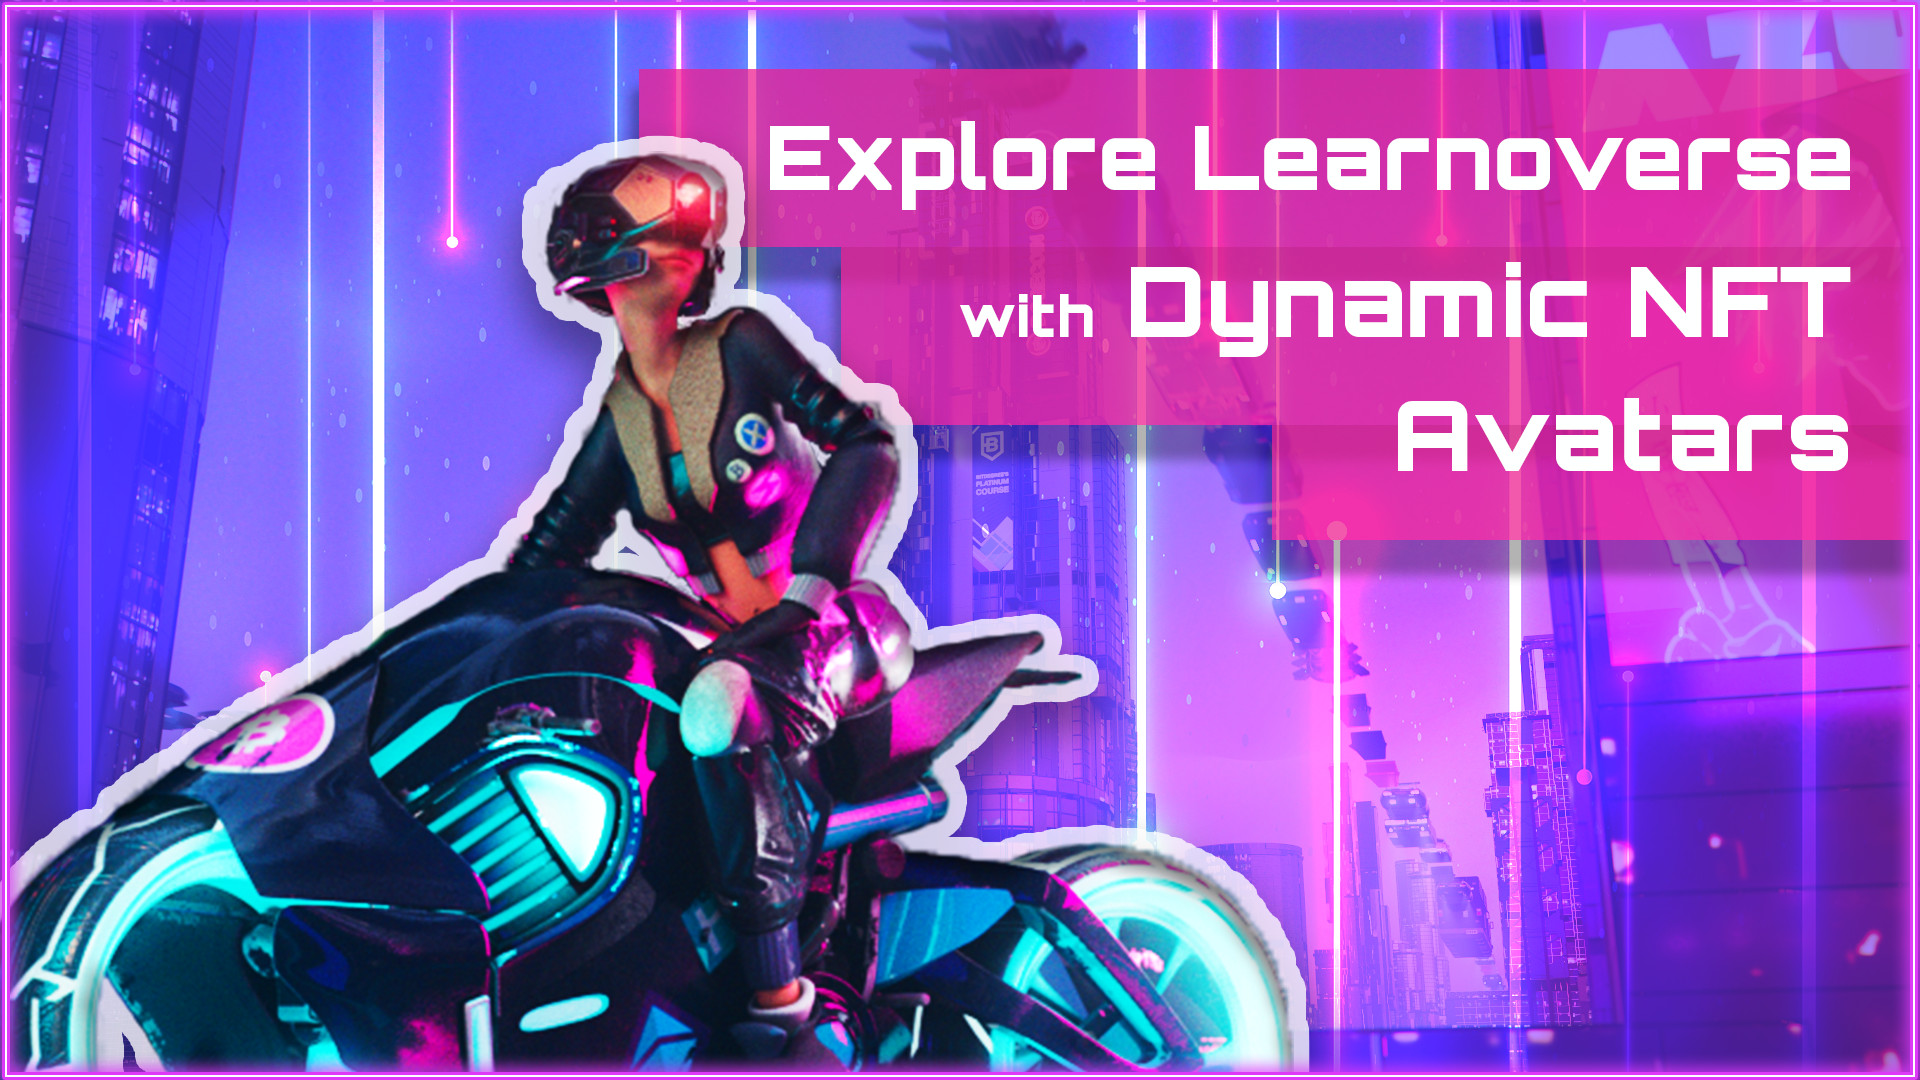 Explore Learnoverse with Dynamic NFT Avatars cover image